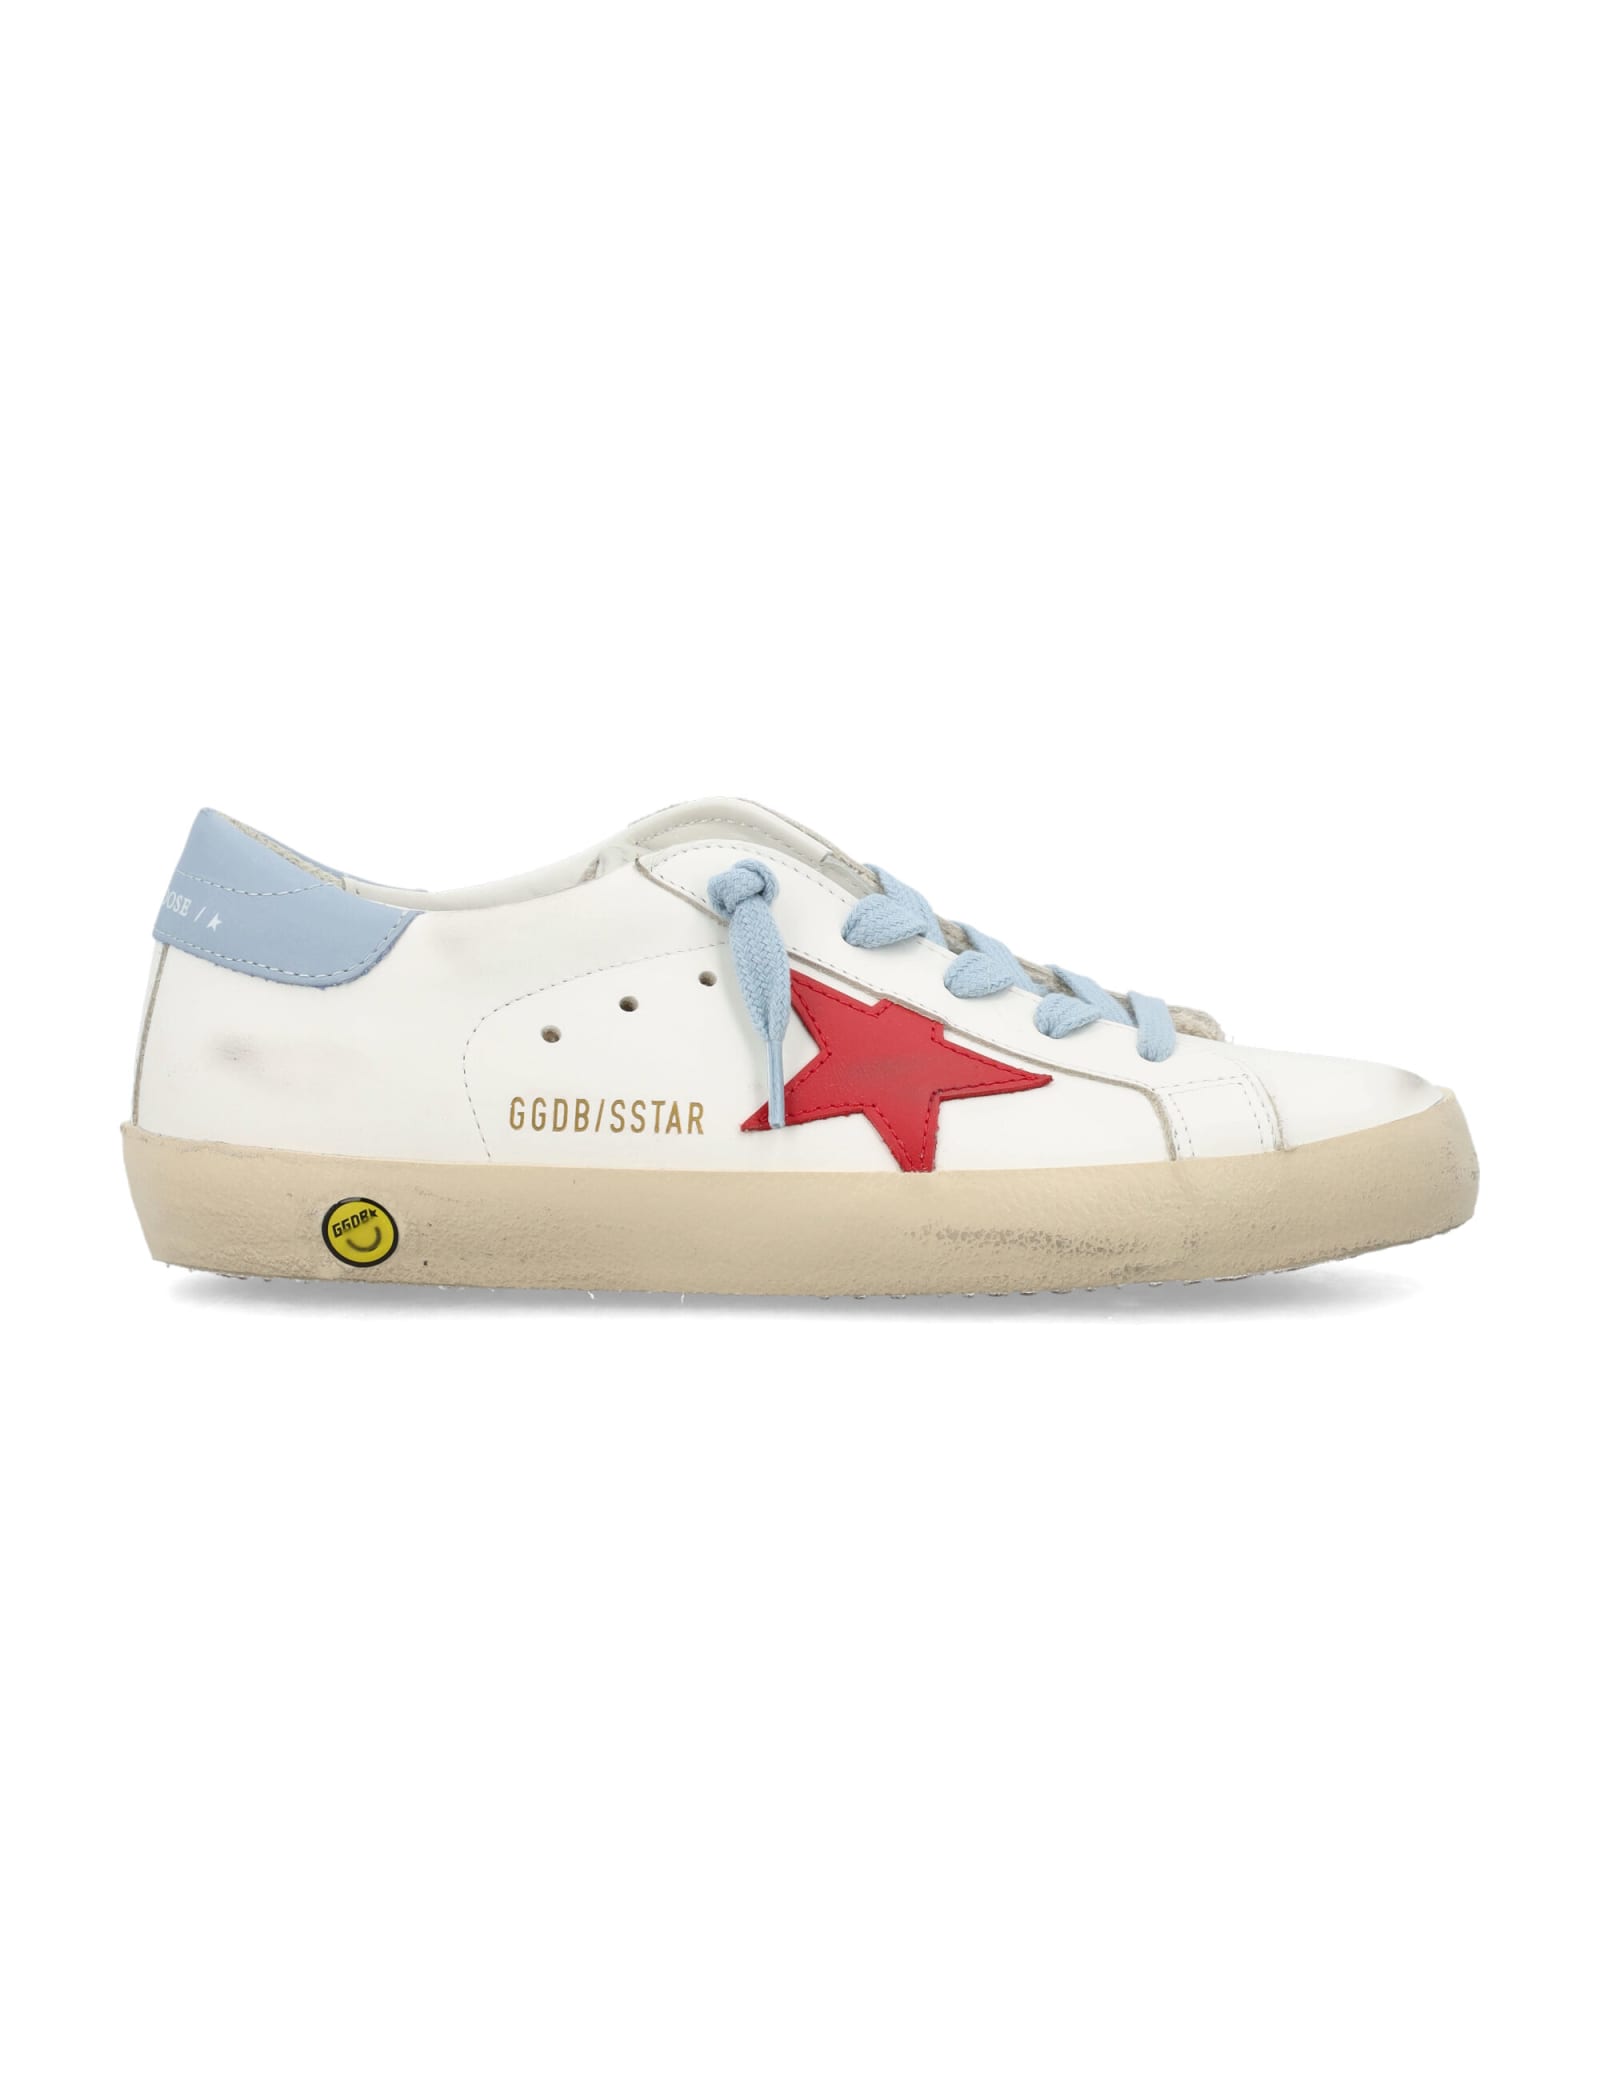 Shop Golden Goose Super Star Sneakers In White/red/blue